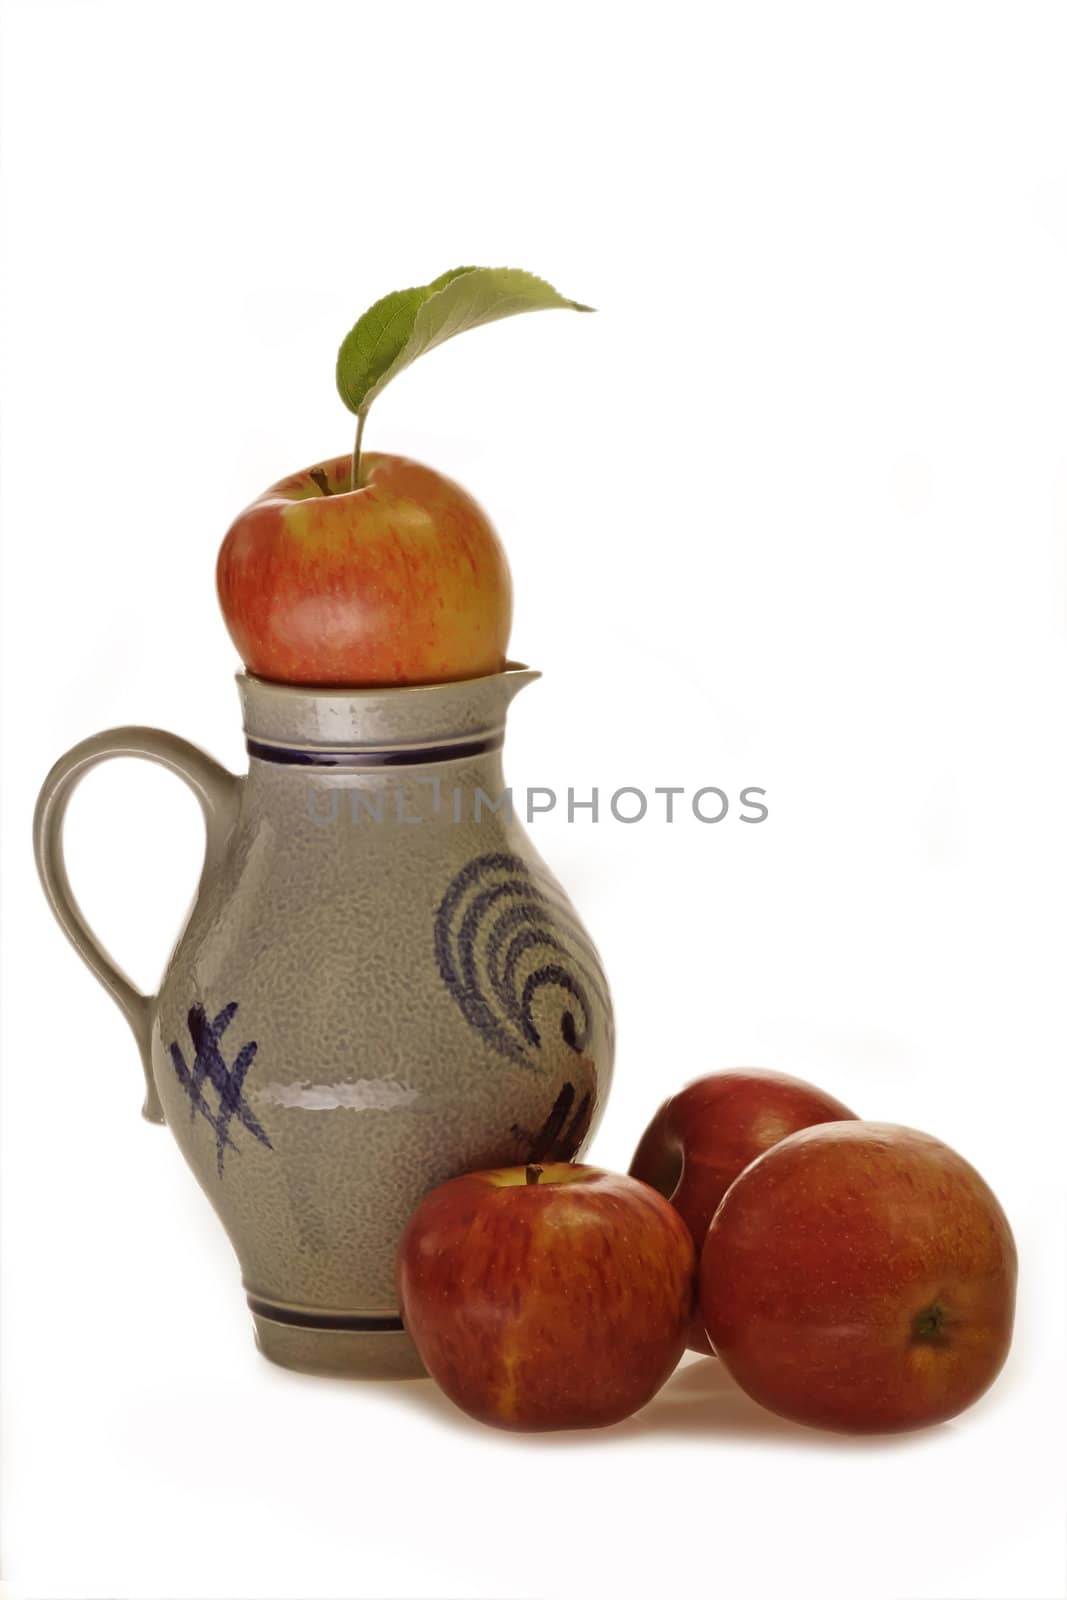 Apple wine jug with fresh apples on bright background